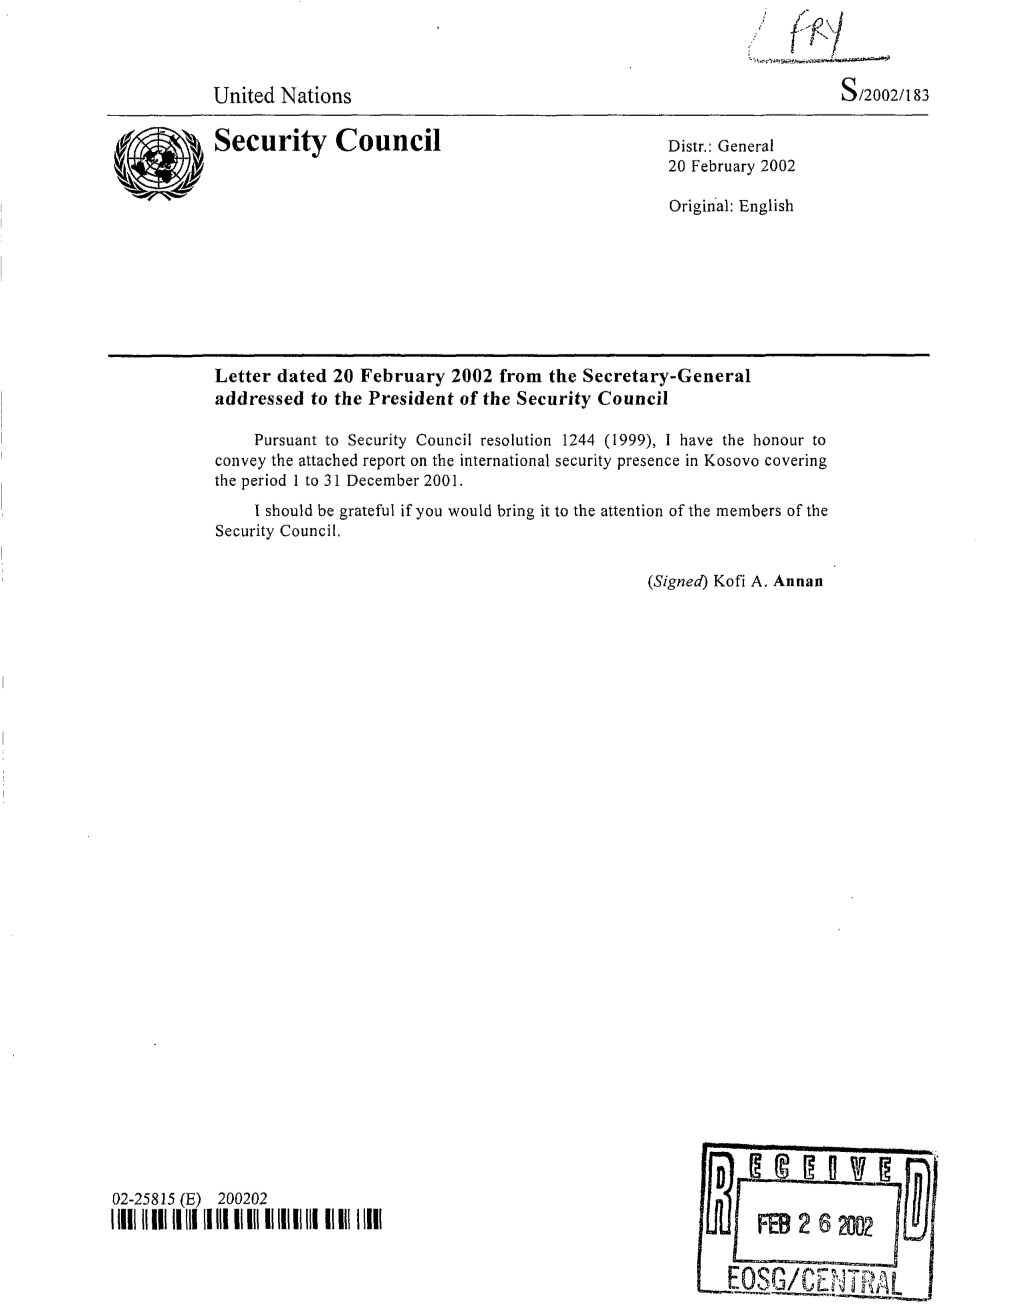 Security Council Distr.: General 20 February 2002